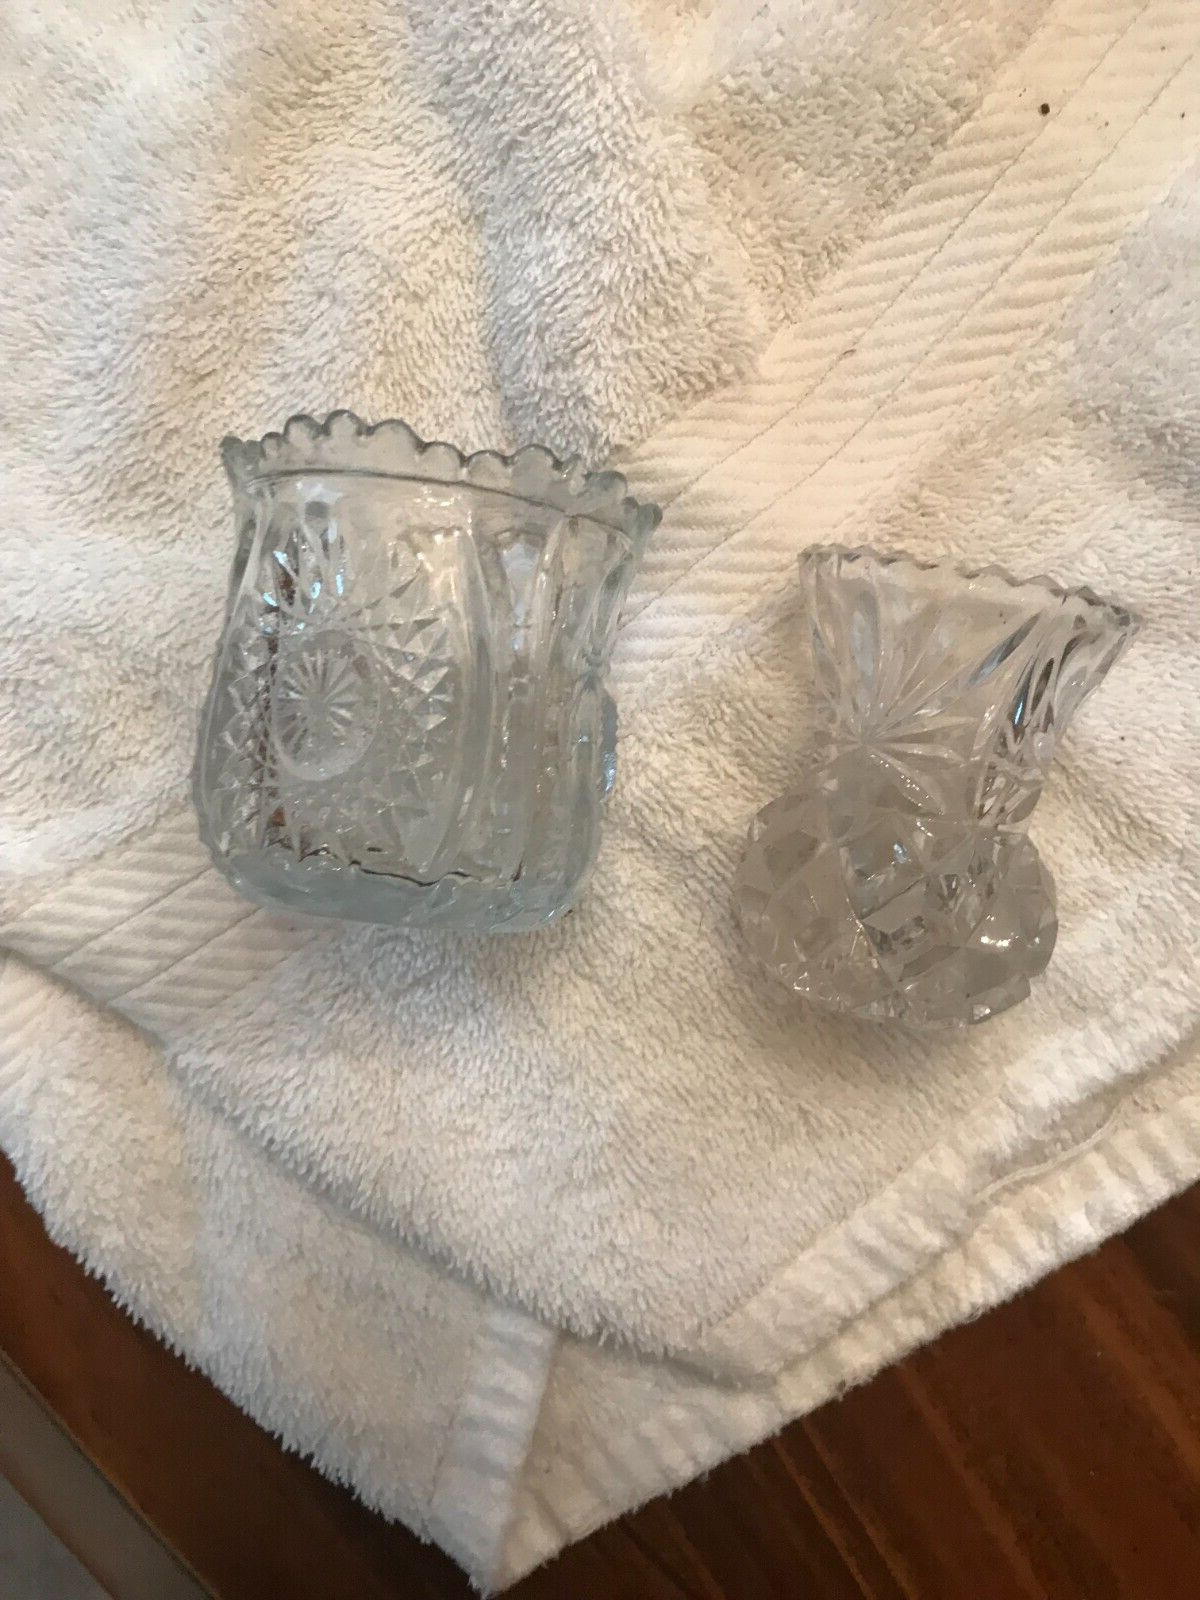 ITEM NO. GYT2R TWO GLASS TOOTHPICK HOLDERS